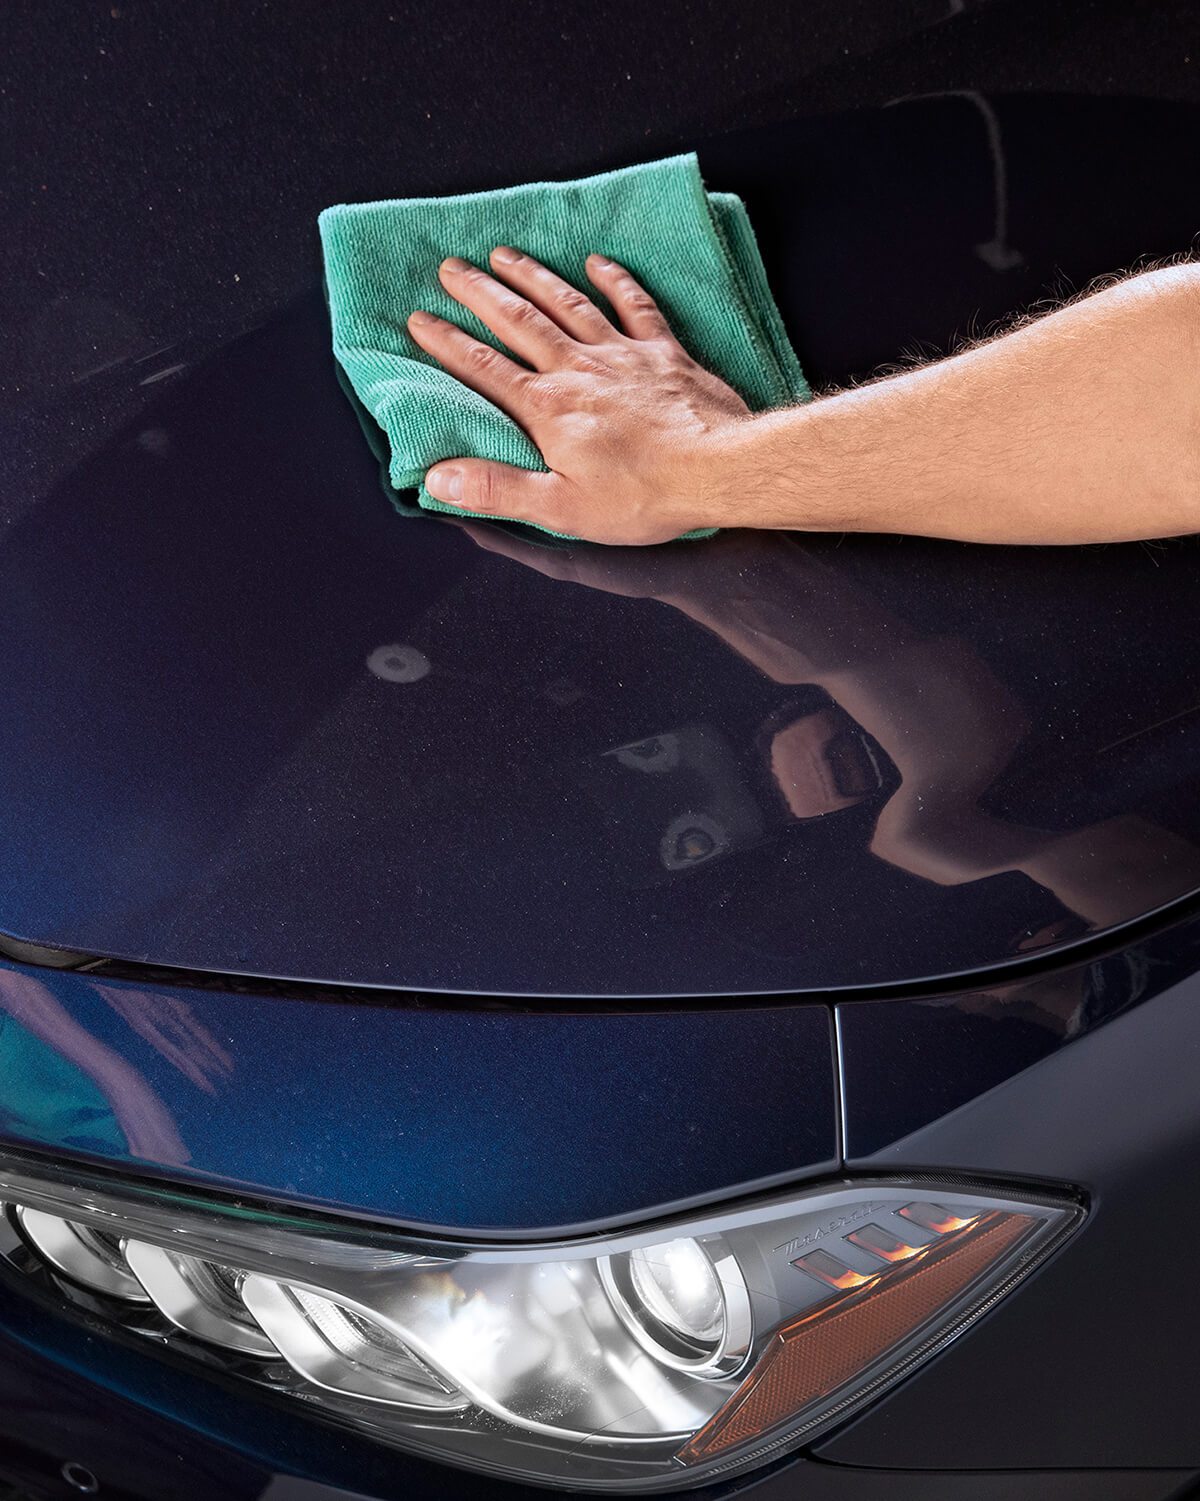 Do scratch free microfiber towels work on car paint?